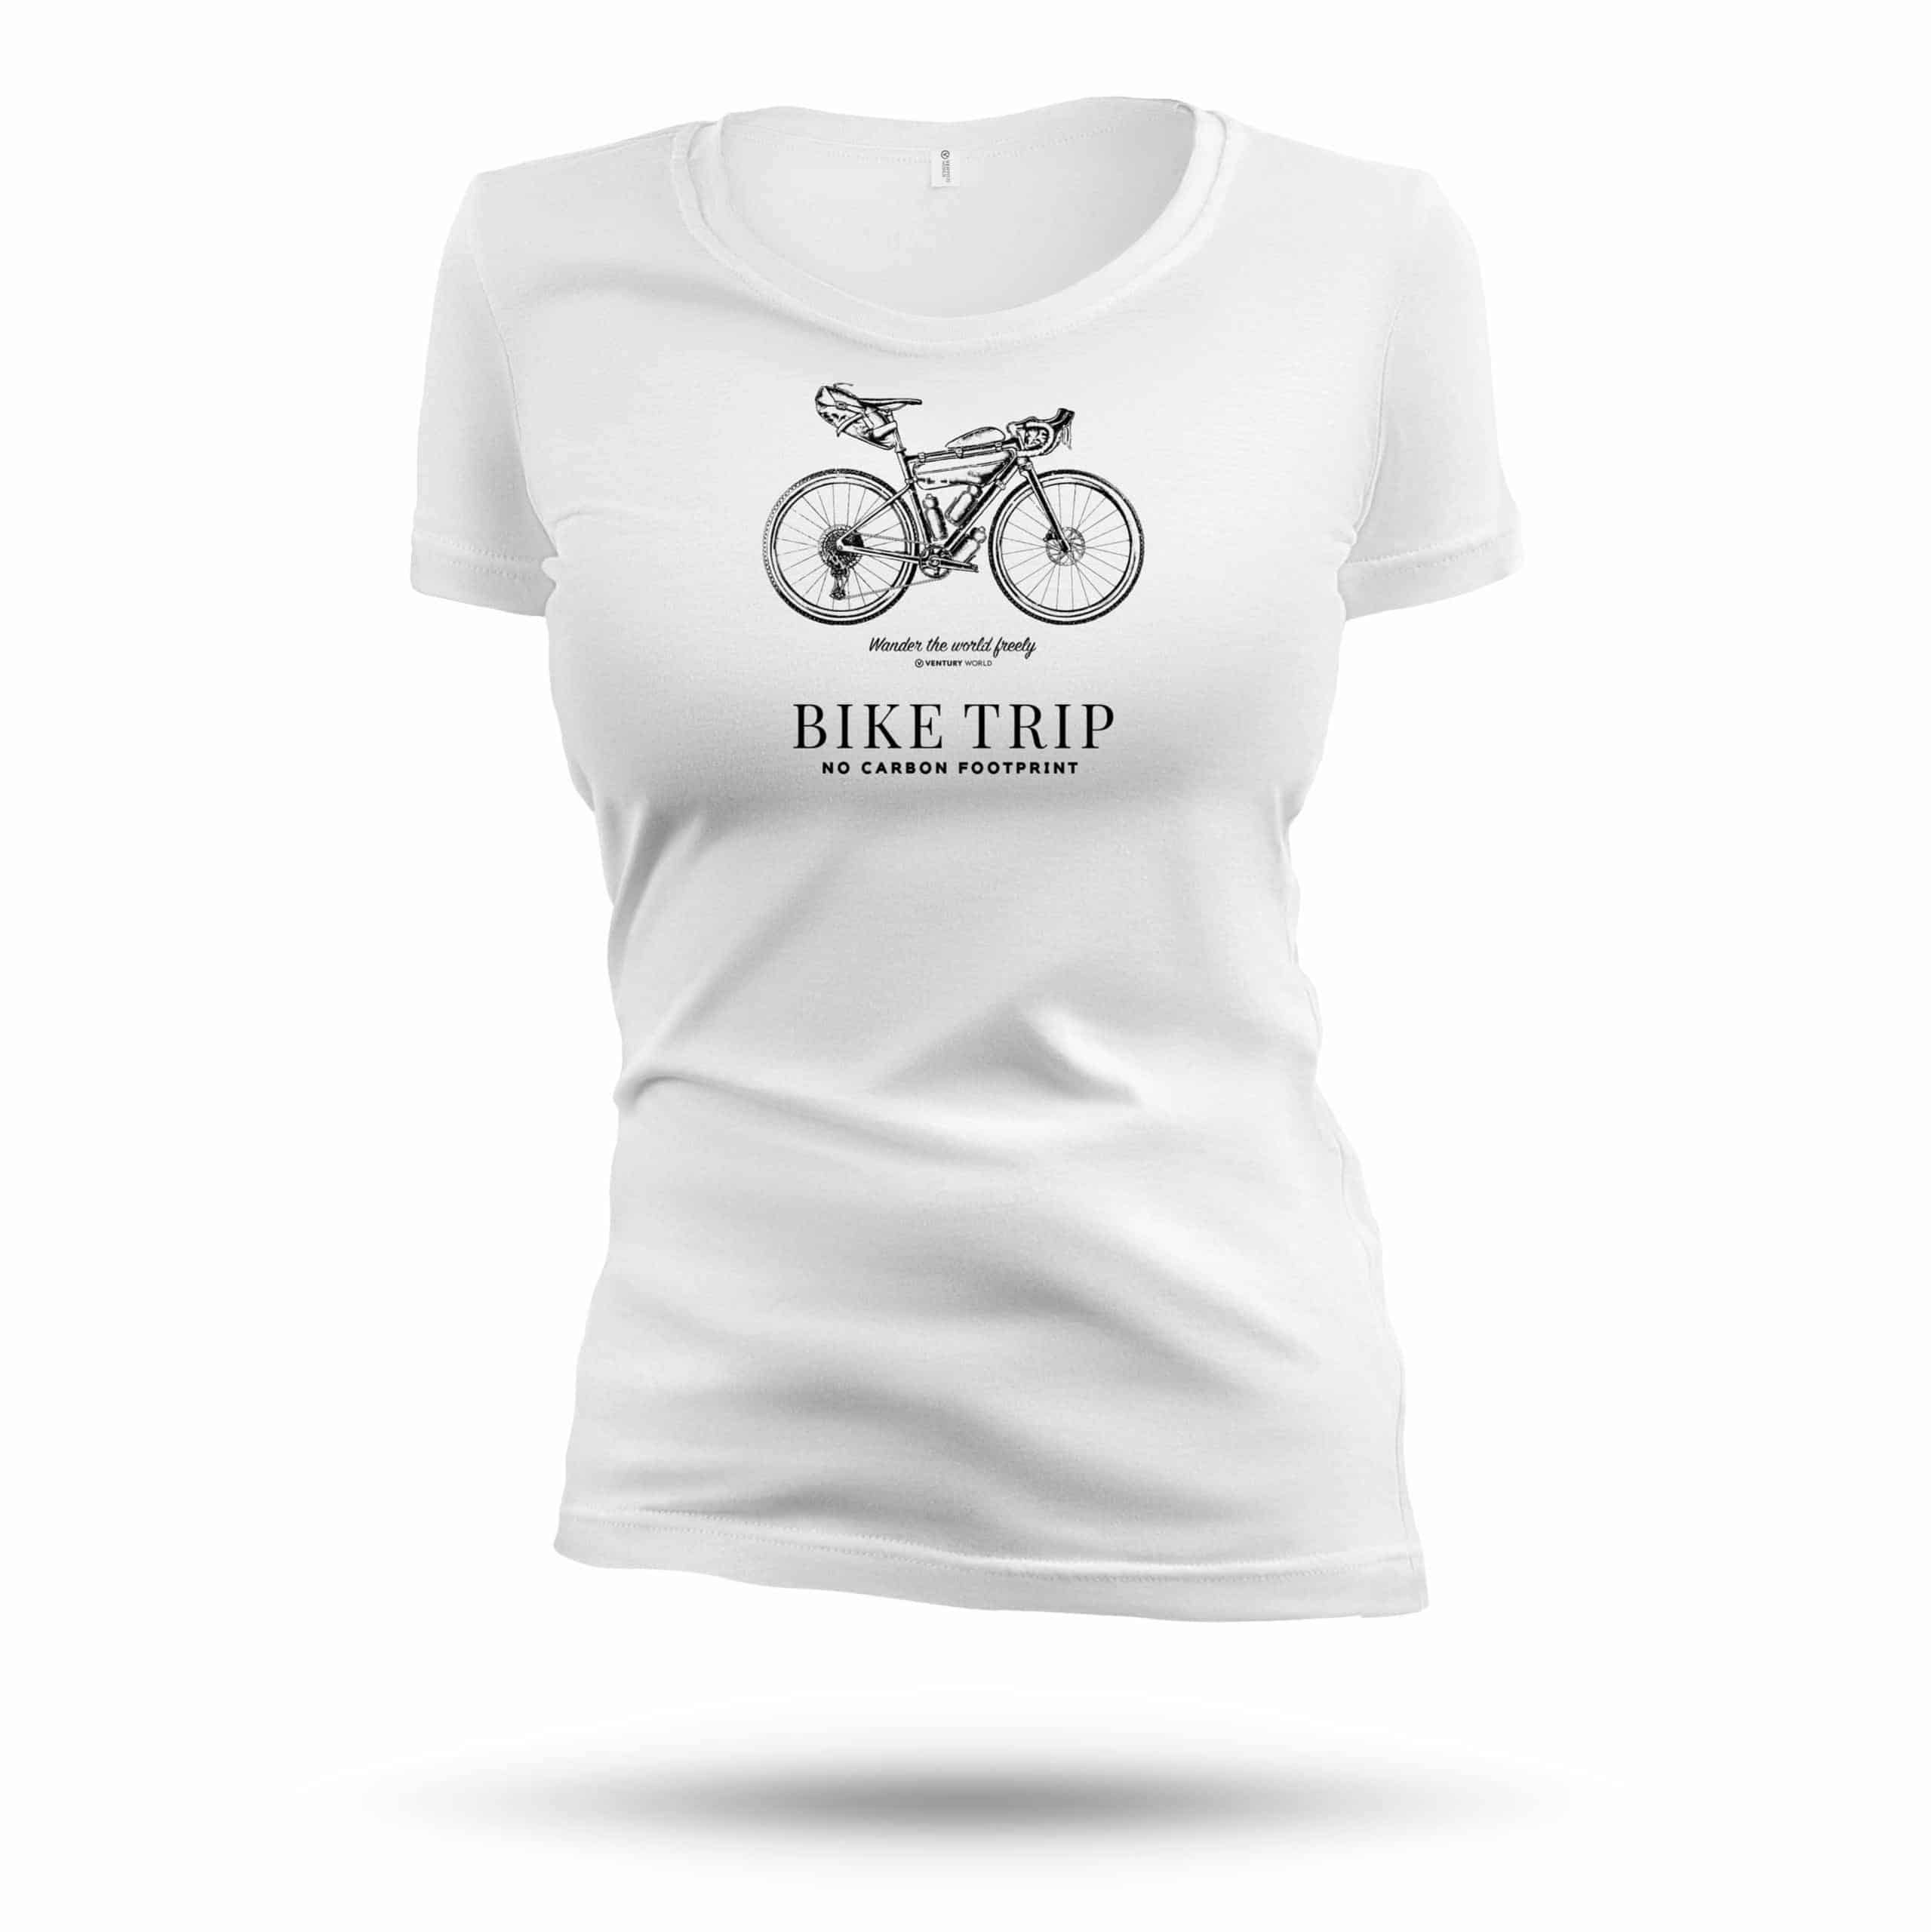 T-shirt cycling femme - Travel Bike bikepacking - Wander the world freely - collection T-shirt live freely 100% Naturel taille ajustée grand col rond.